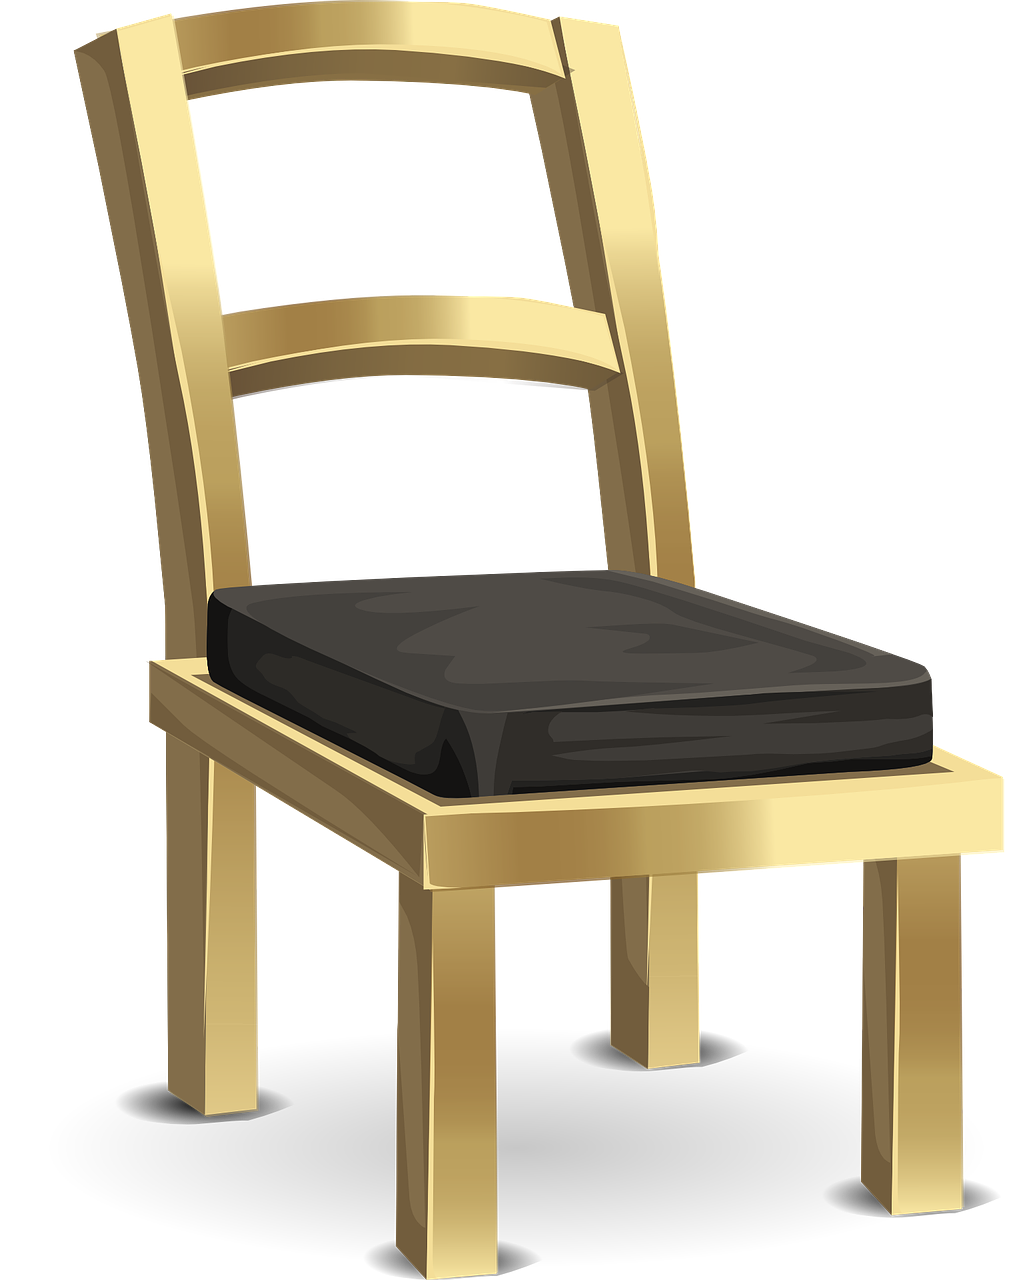 Wooden Furniture Chair PNG Clipart